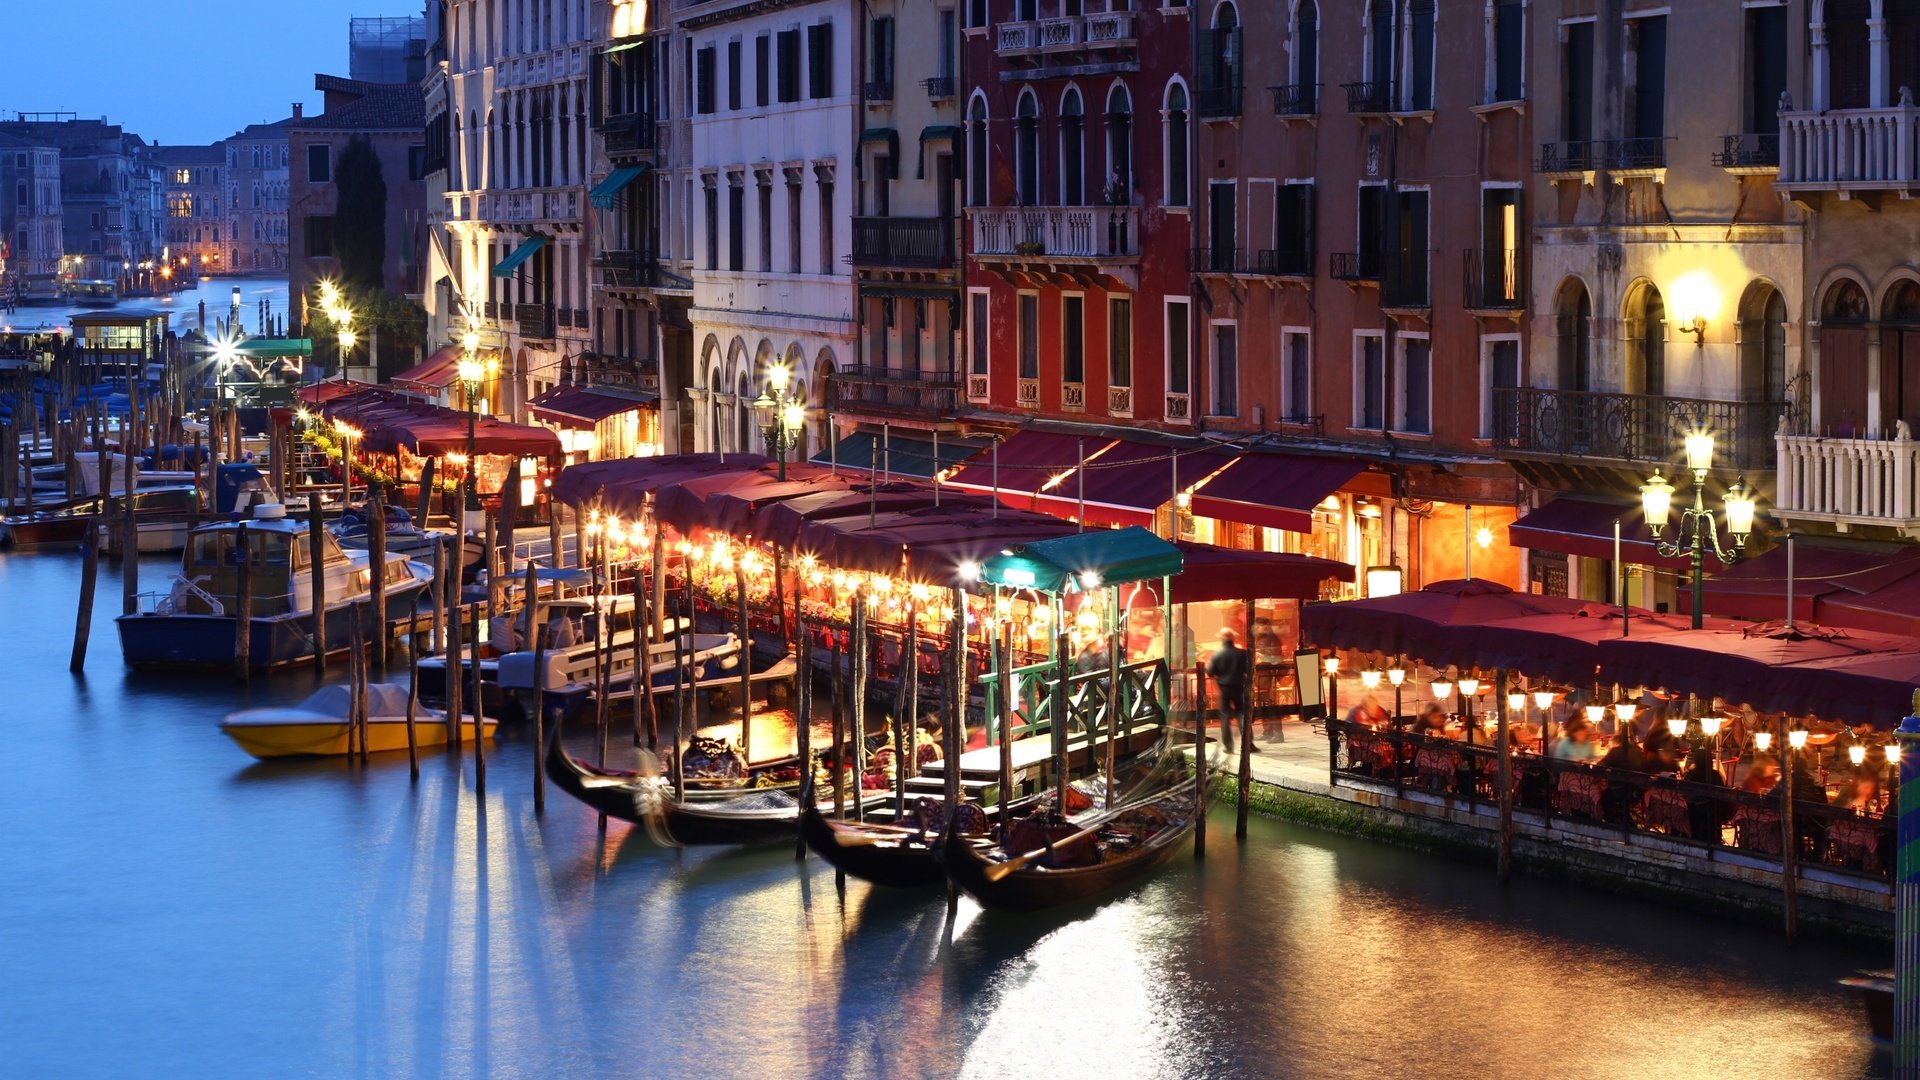 lights, Gondola, Houses, People, Venice, Italy, Boat, Evening, Cafes, Buildings, Canal Wallpaper